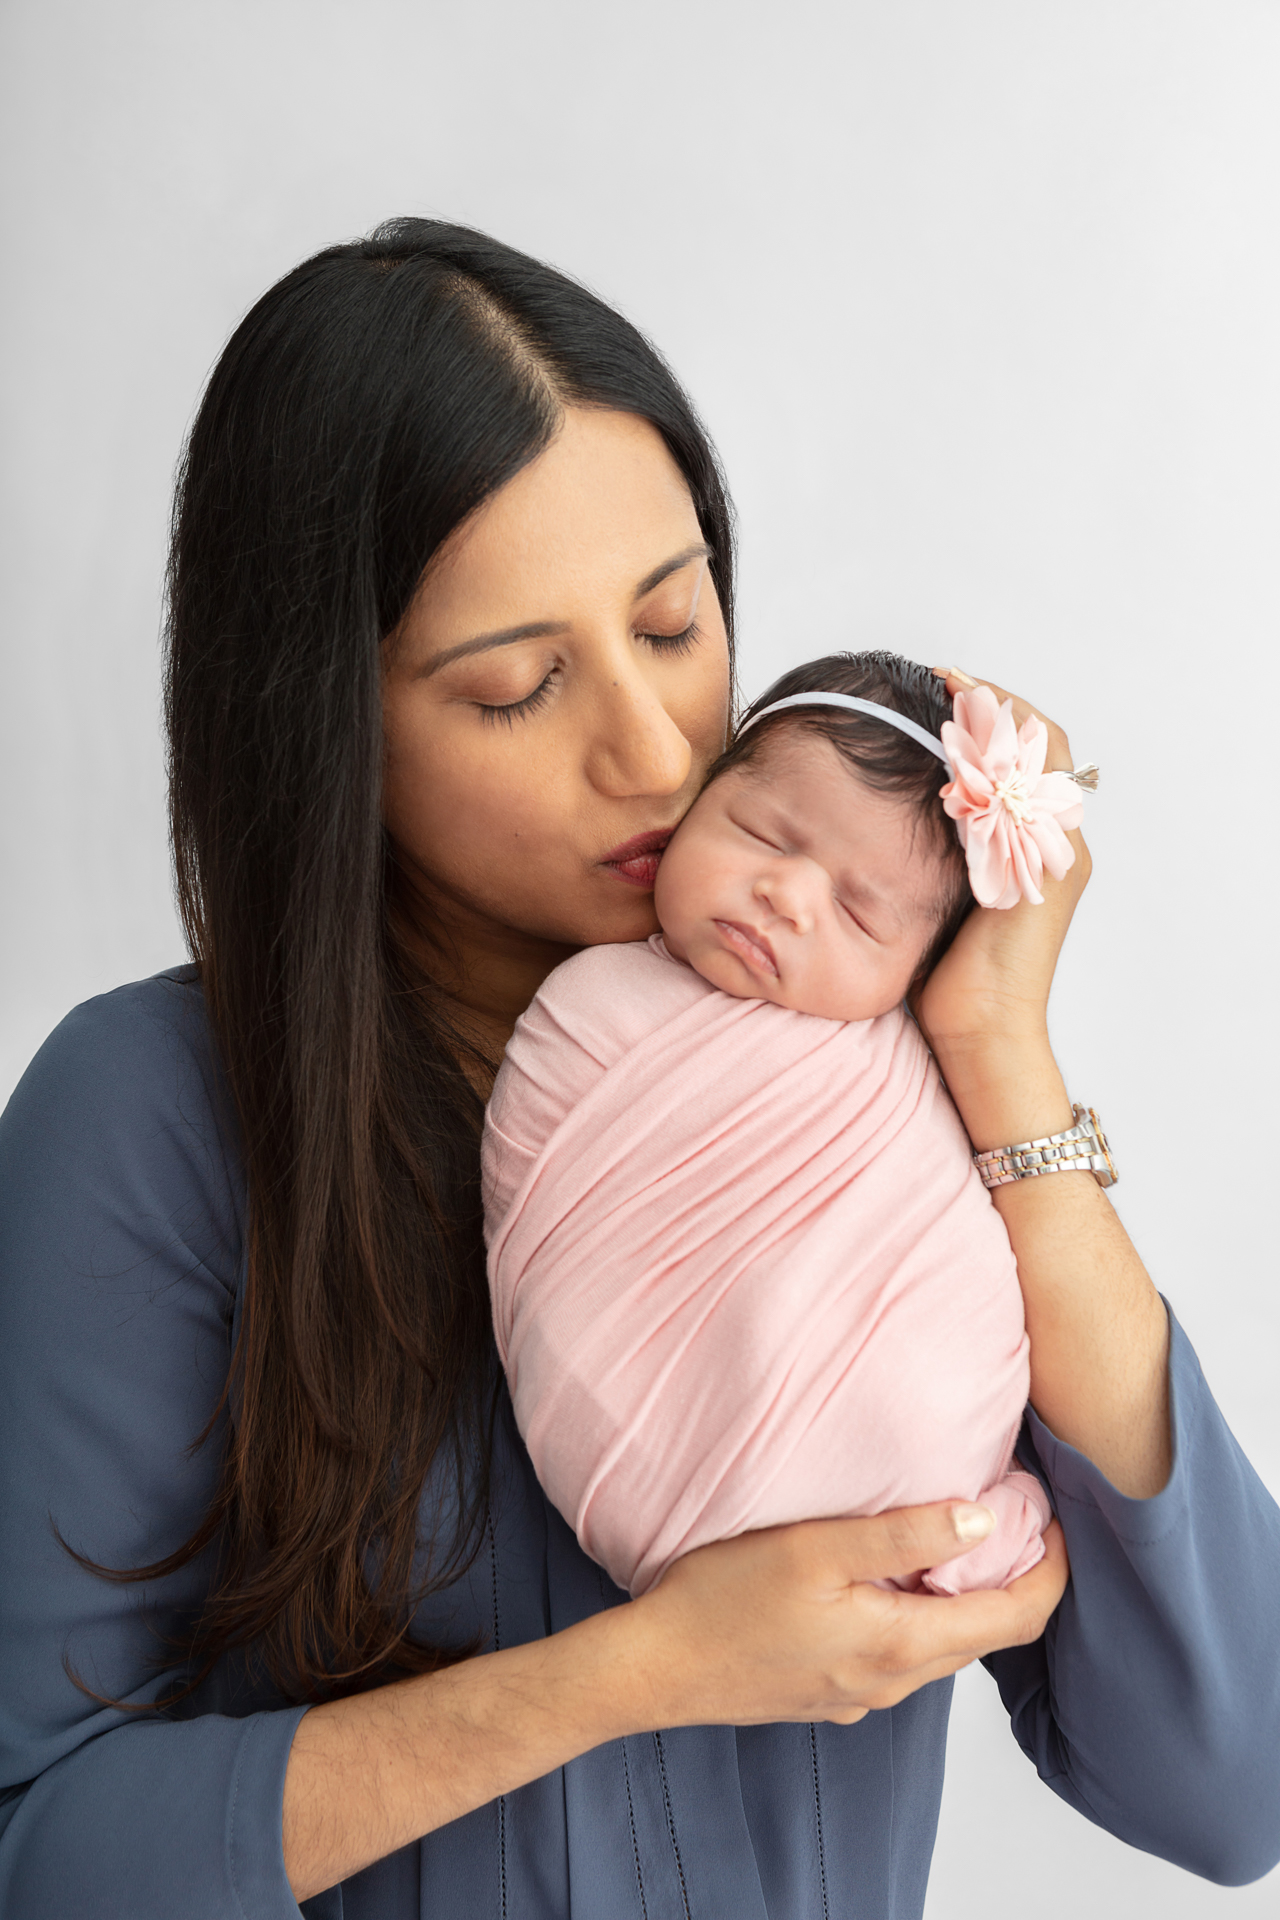 new mom with long dark hair holding up her newborn baby girl who is swaddled in light pink